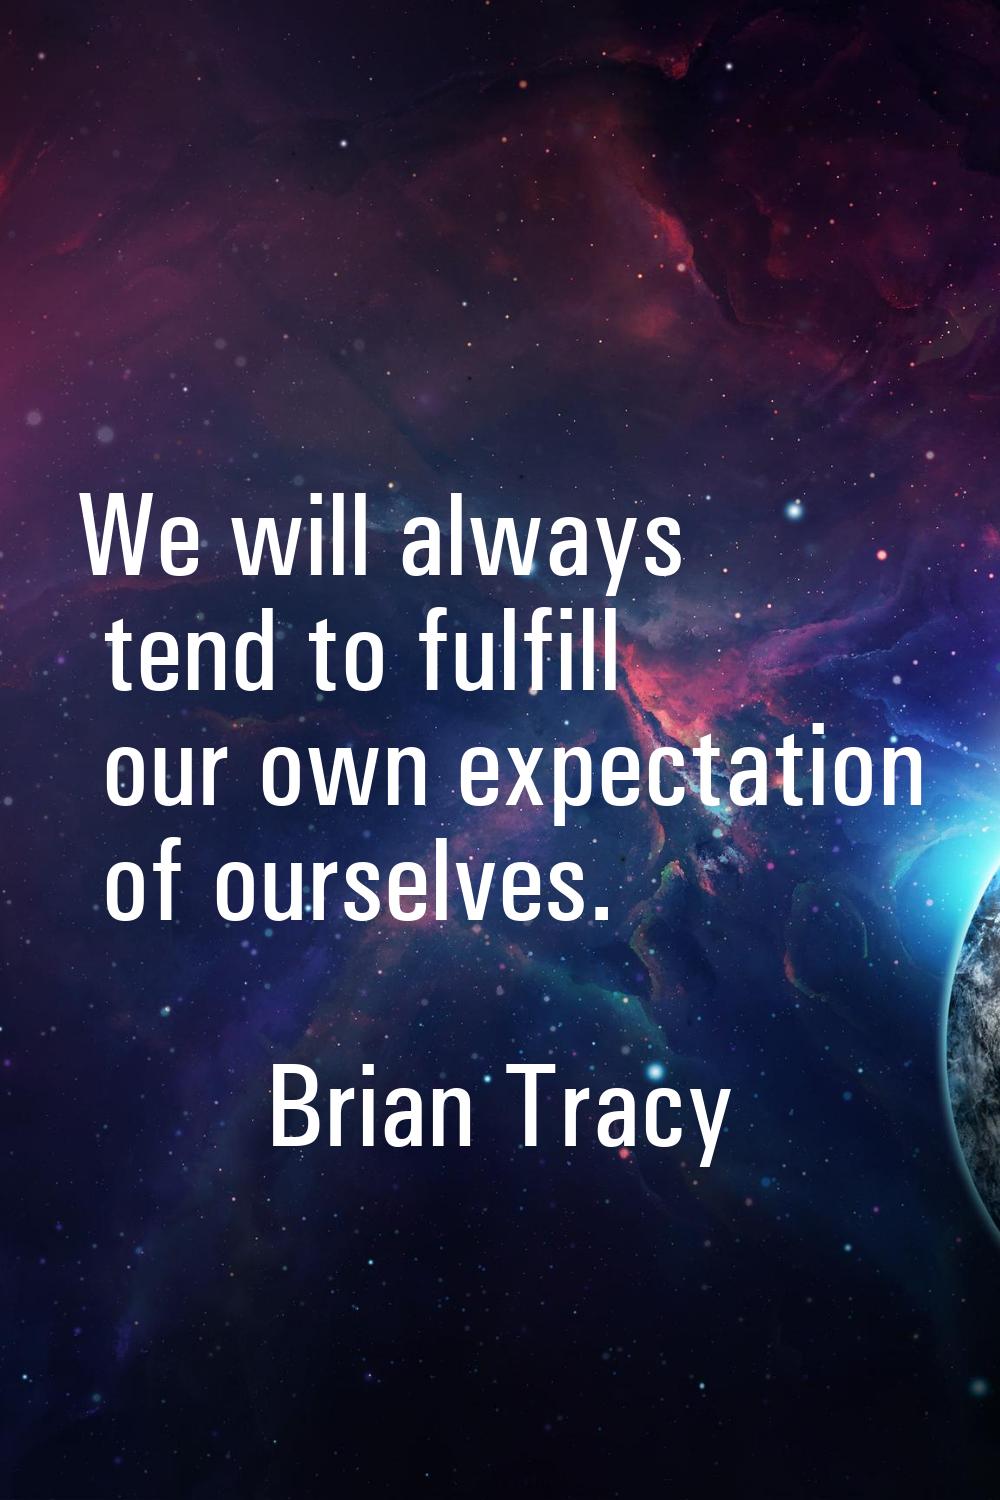 We will always tend to fulfill our own expectation of ourselves.